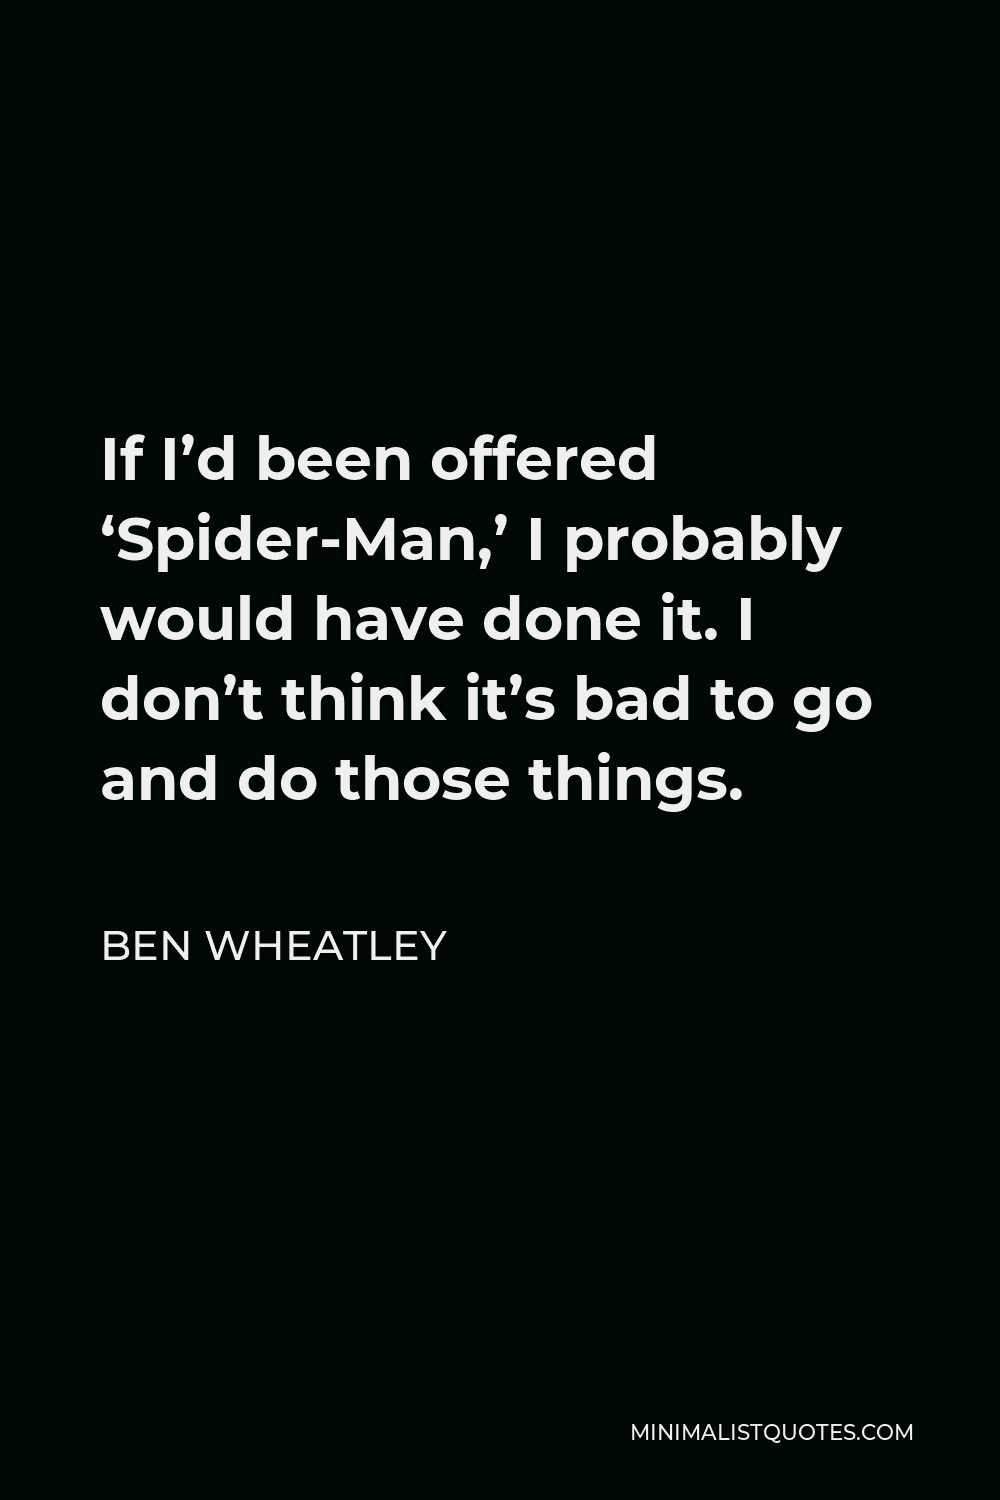 Ben Wheatley Quote - If I’d been offered ‘Spider-Man,’ I probably would have done it. I don’t think it’s bad to go and do those things.